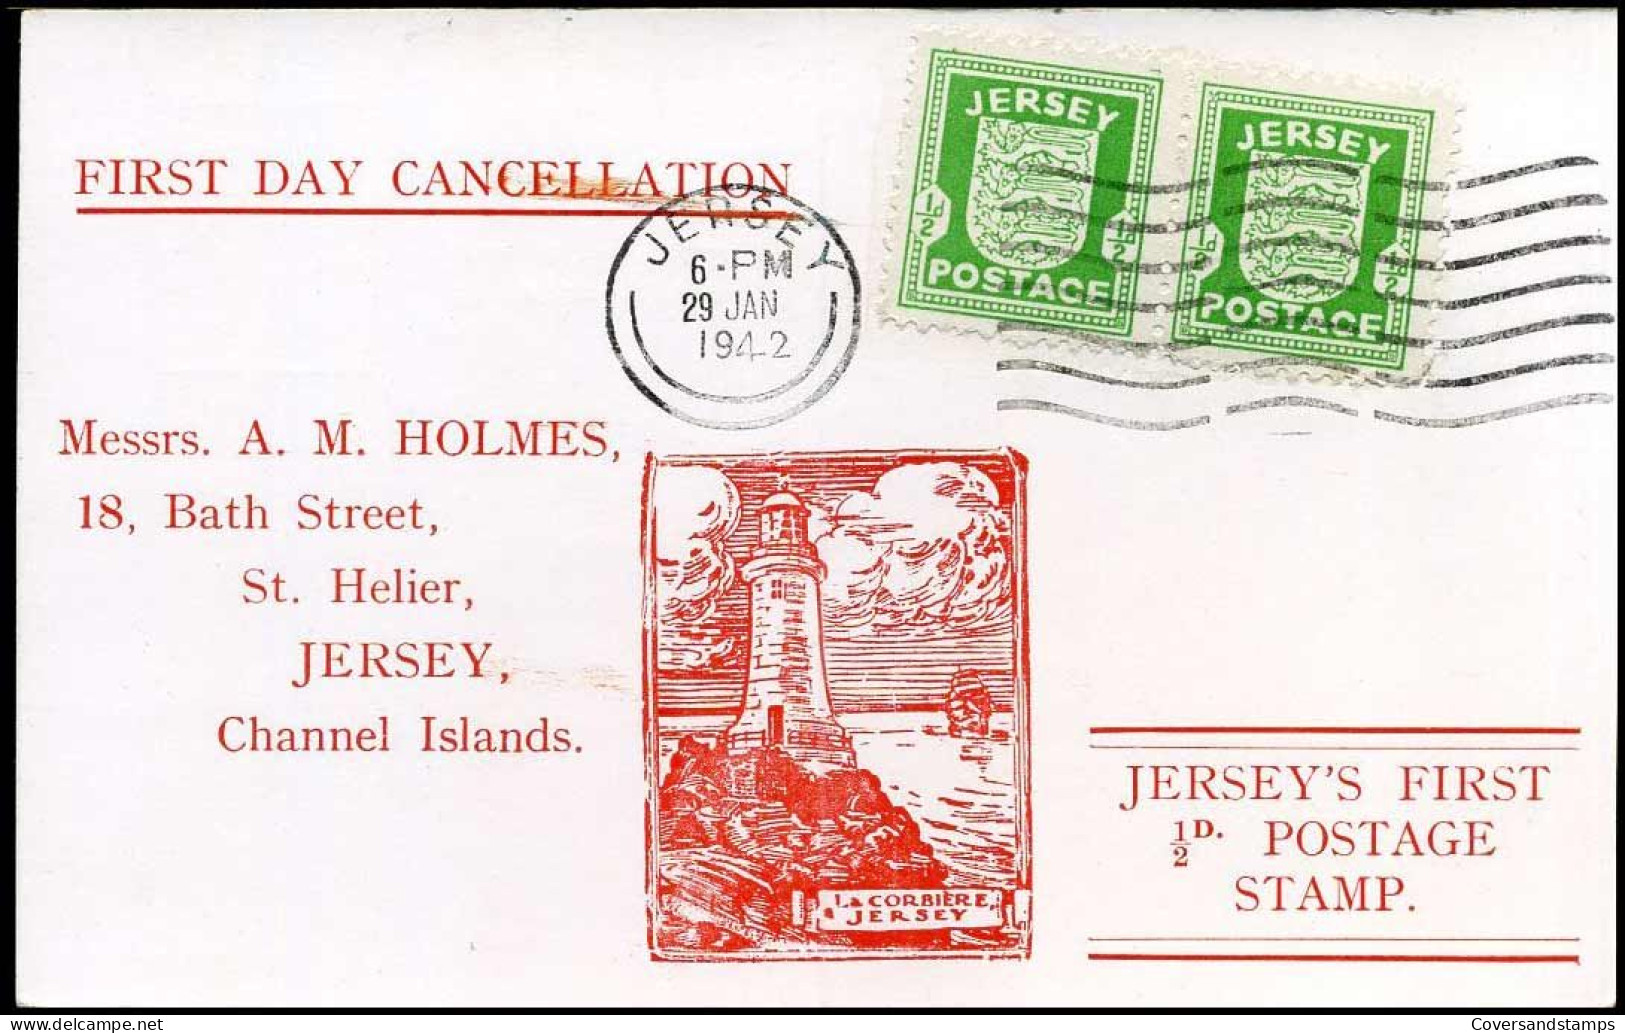 Postcard - First Day Cancellation - Jersey's First 1/2 D Postage Stamp - Jersey